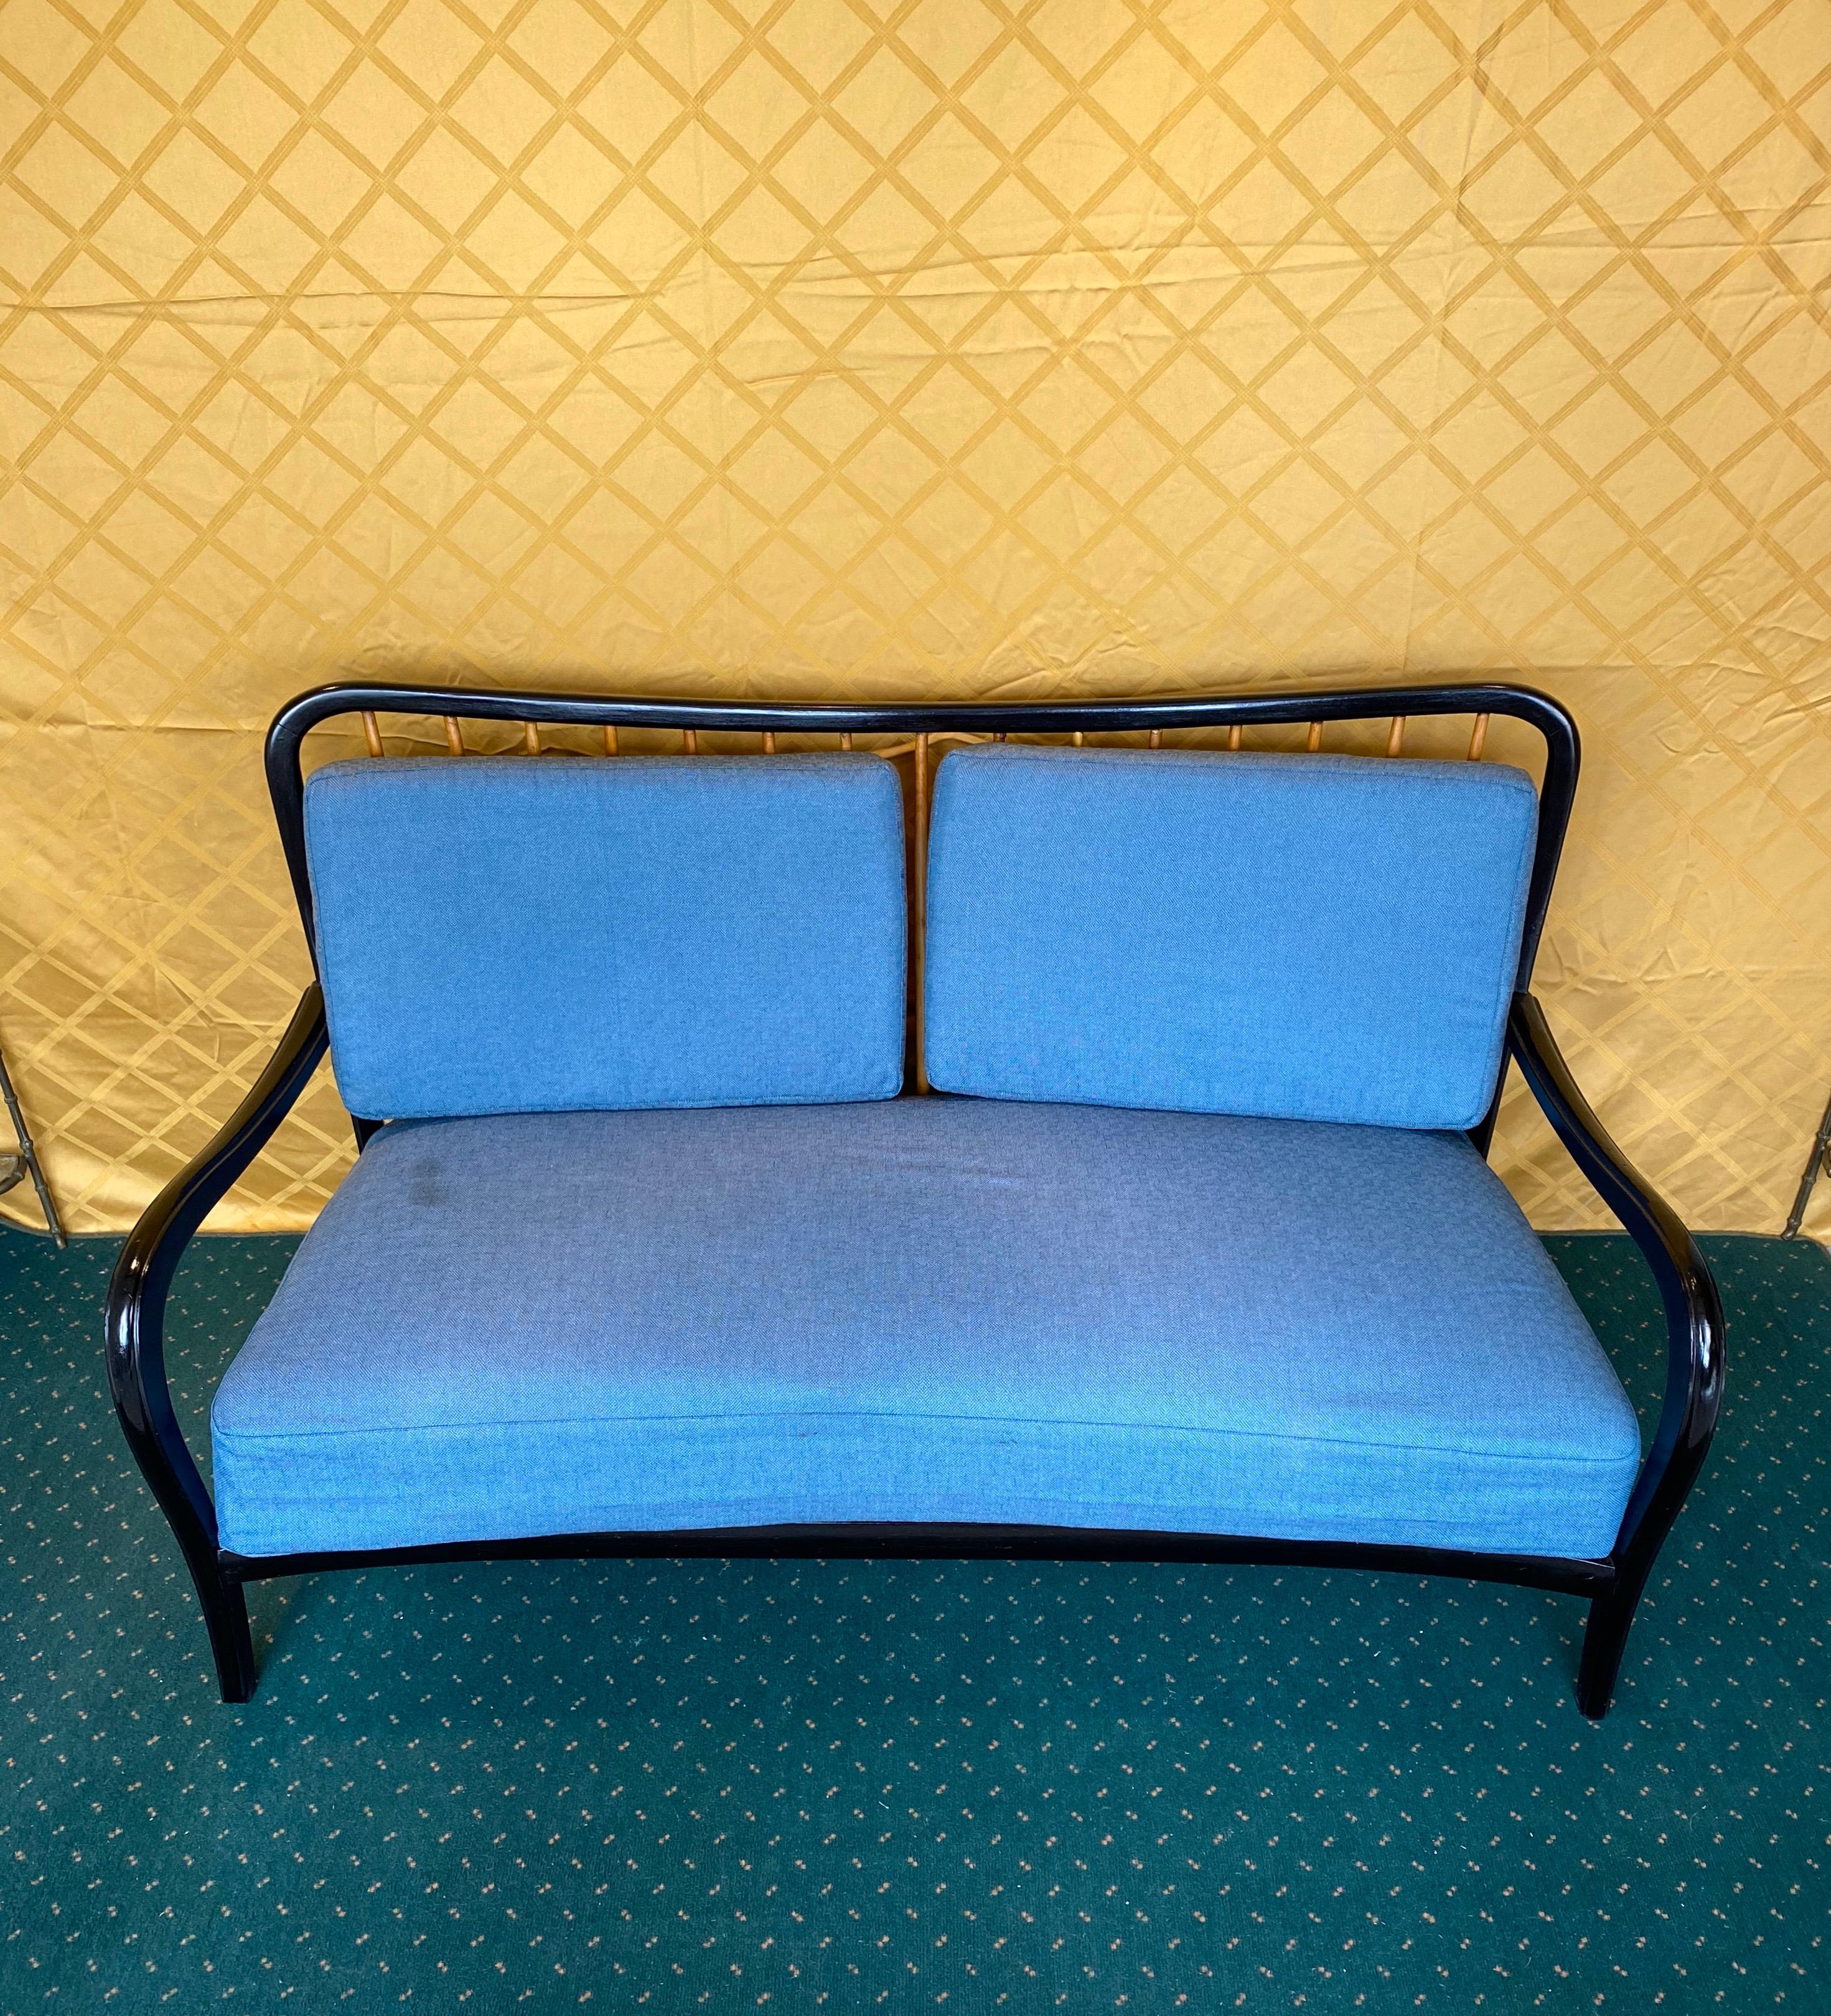 Two-seater sofa by the Italian designer Paolo Buffa, featuring a wooden structure and cushions in texture. Made in Italy, circa 1950.